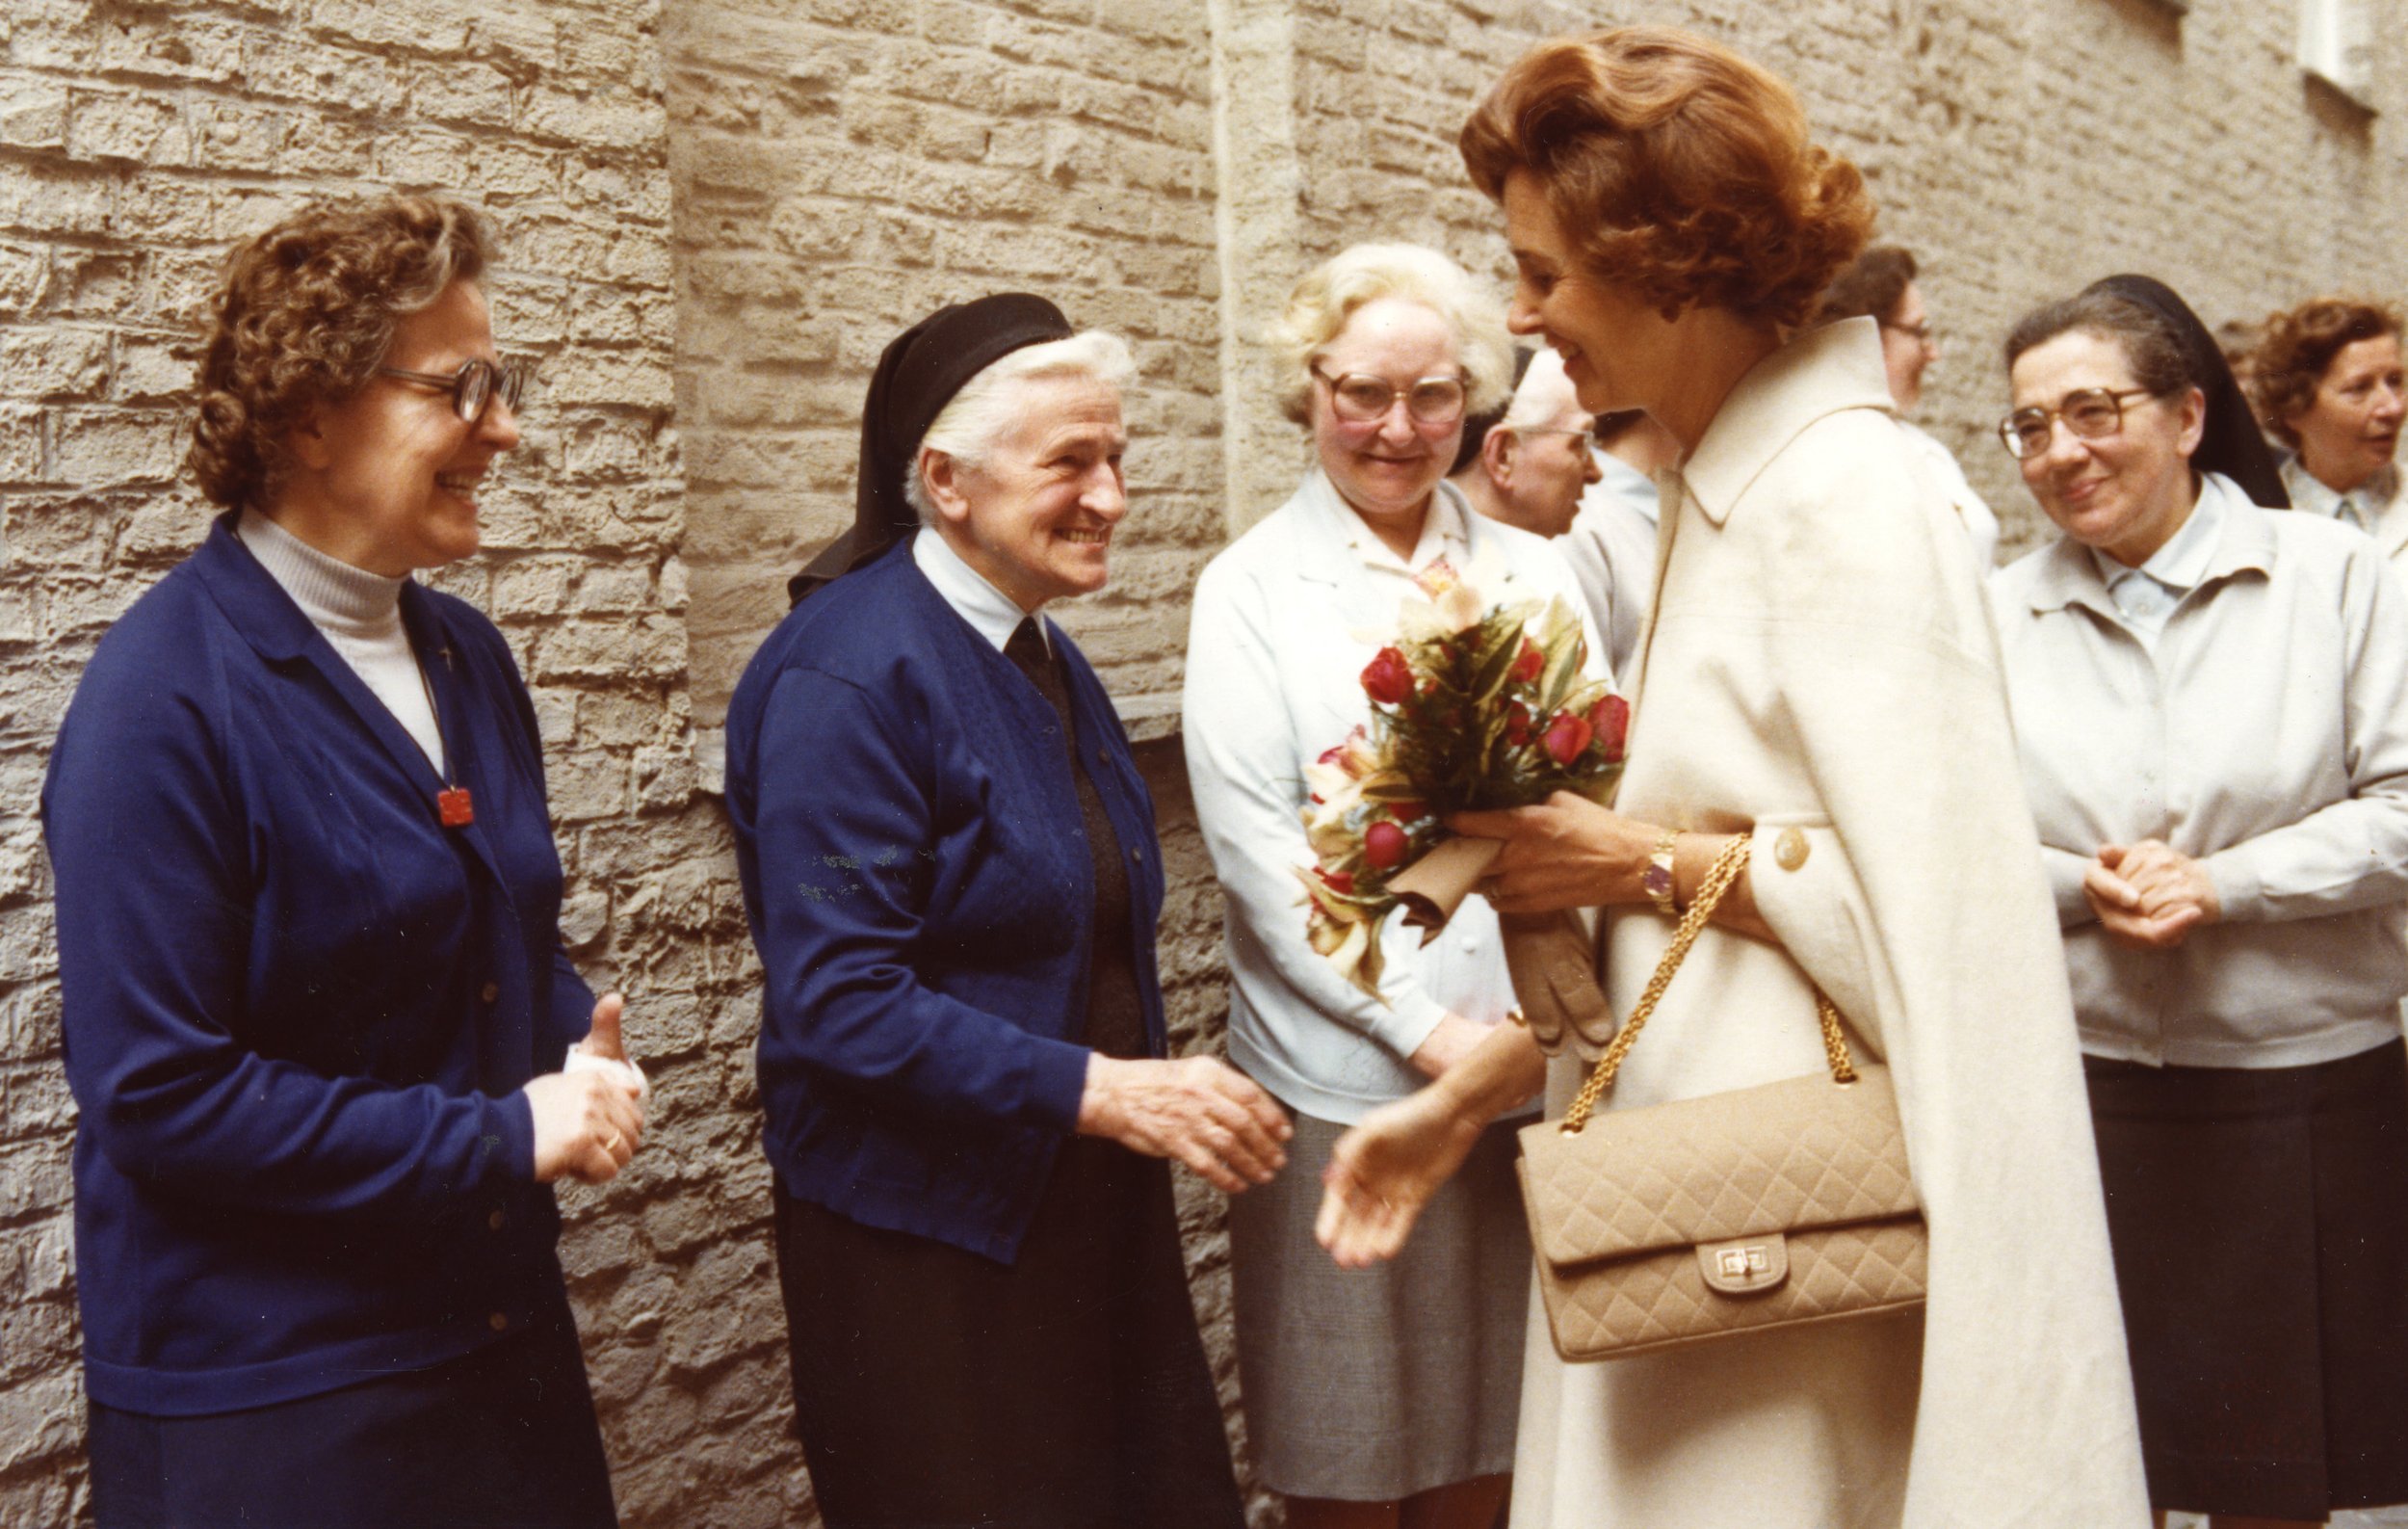 Visit of the Queen Fabiola to the convent of the Apostoline Sisters